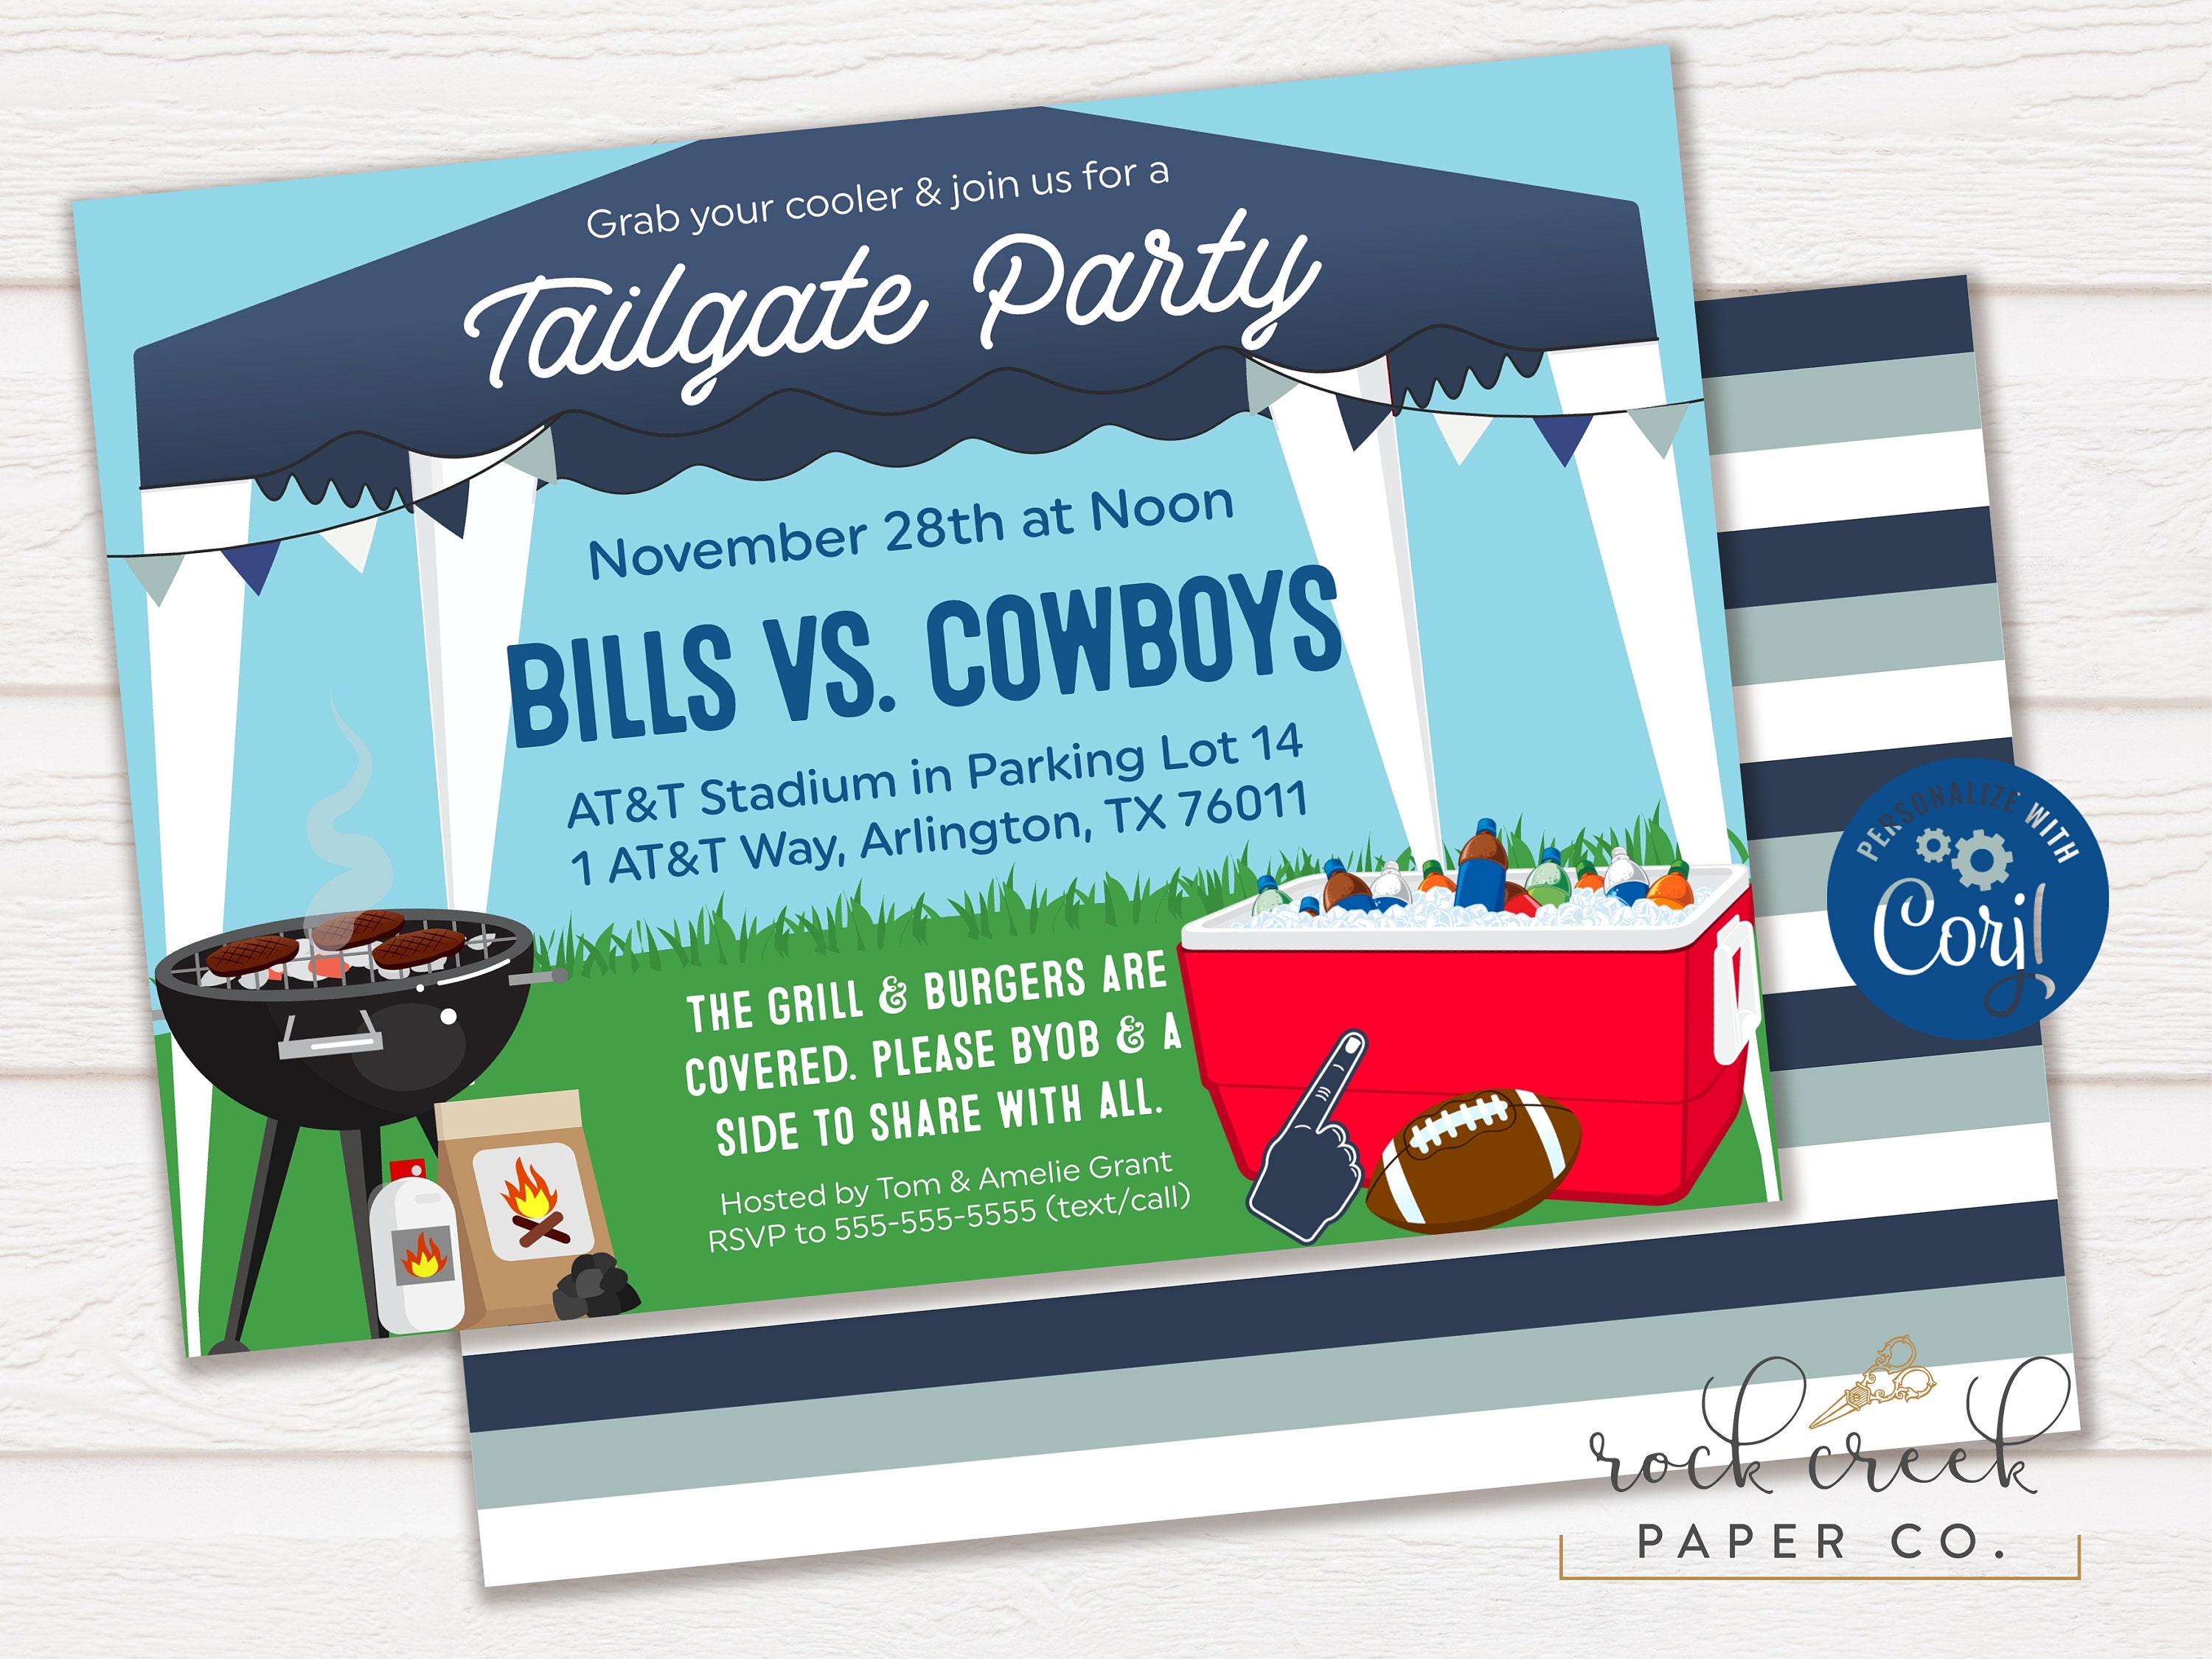 Tailgate Party Invitation Tailgating Party Football Watch photo